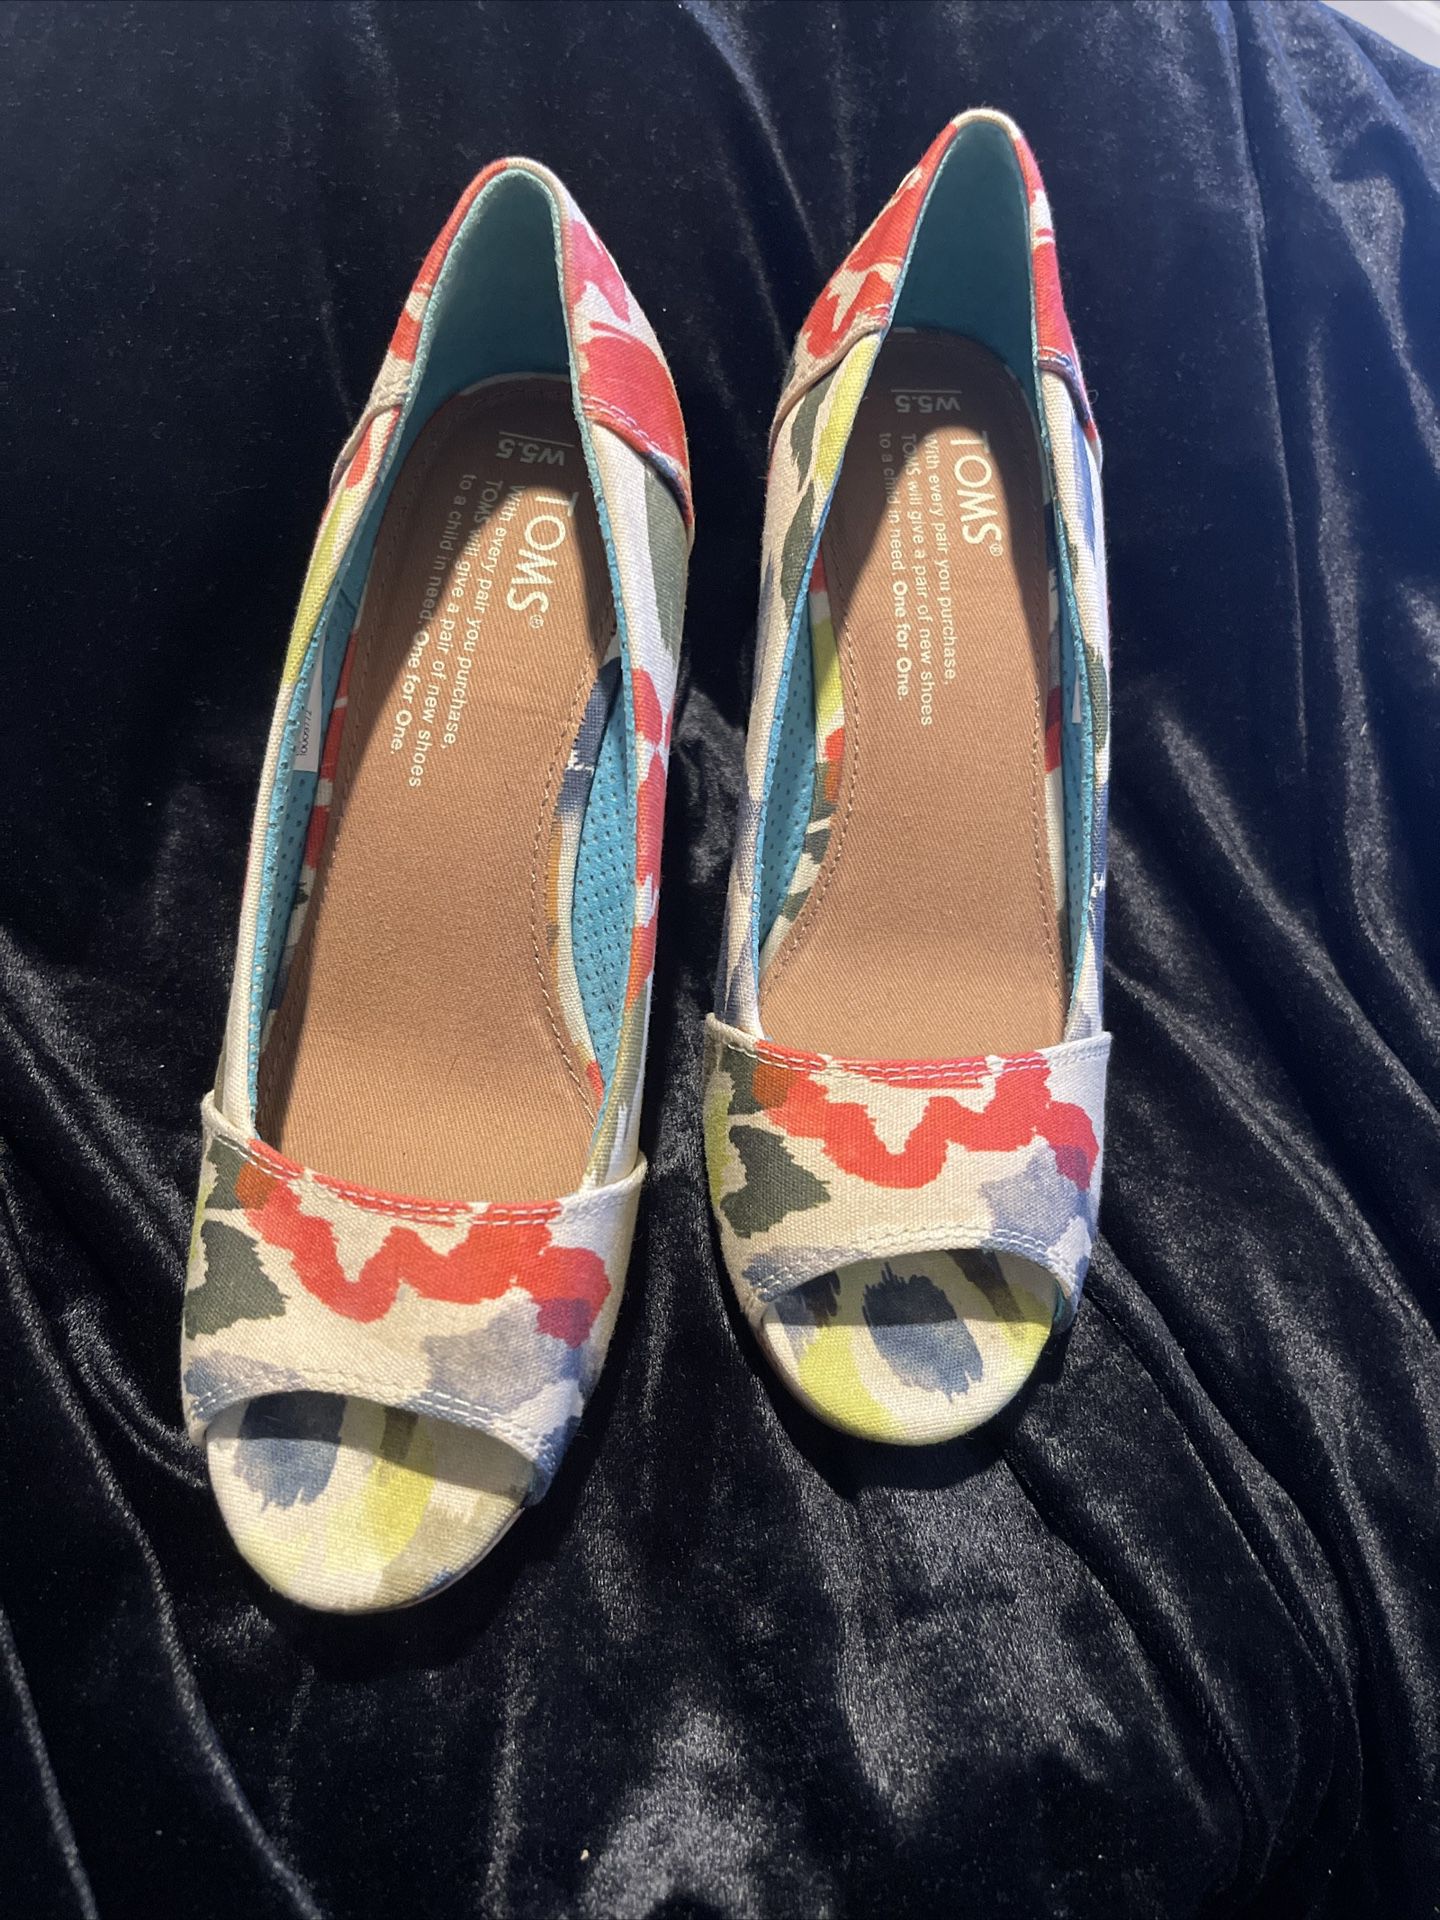 NWOT Toms Size 5.5W Peep Toe Floral Wedge